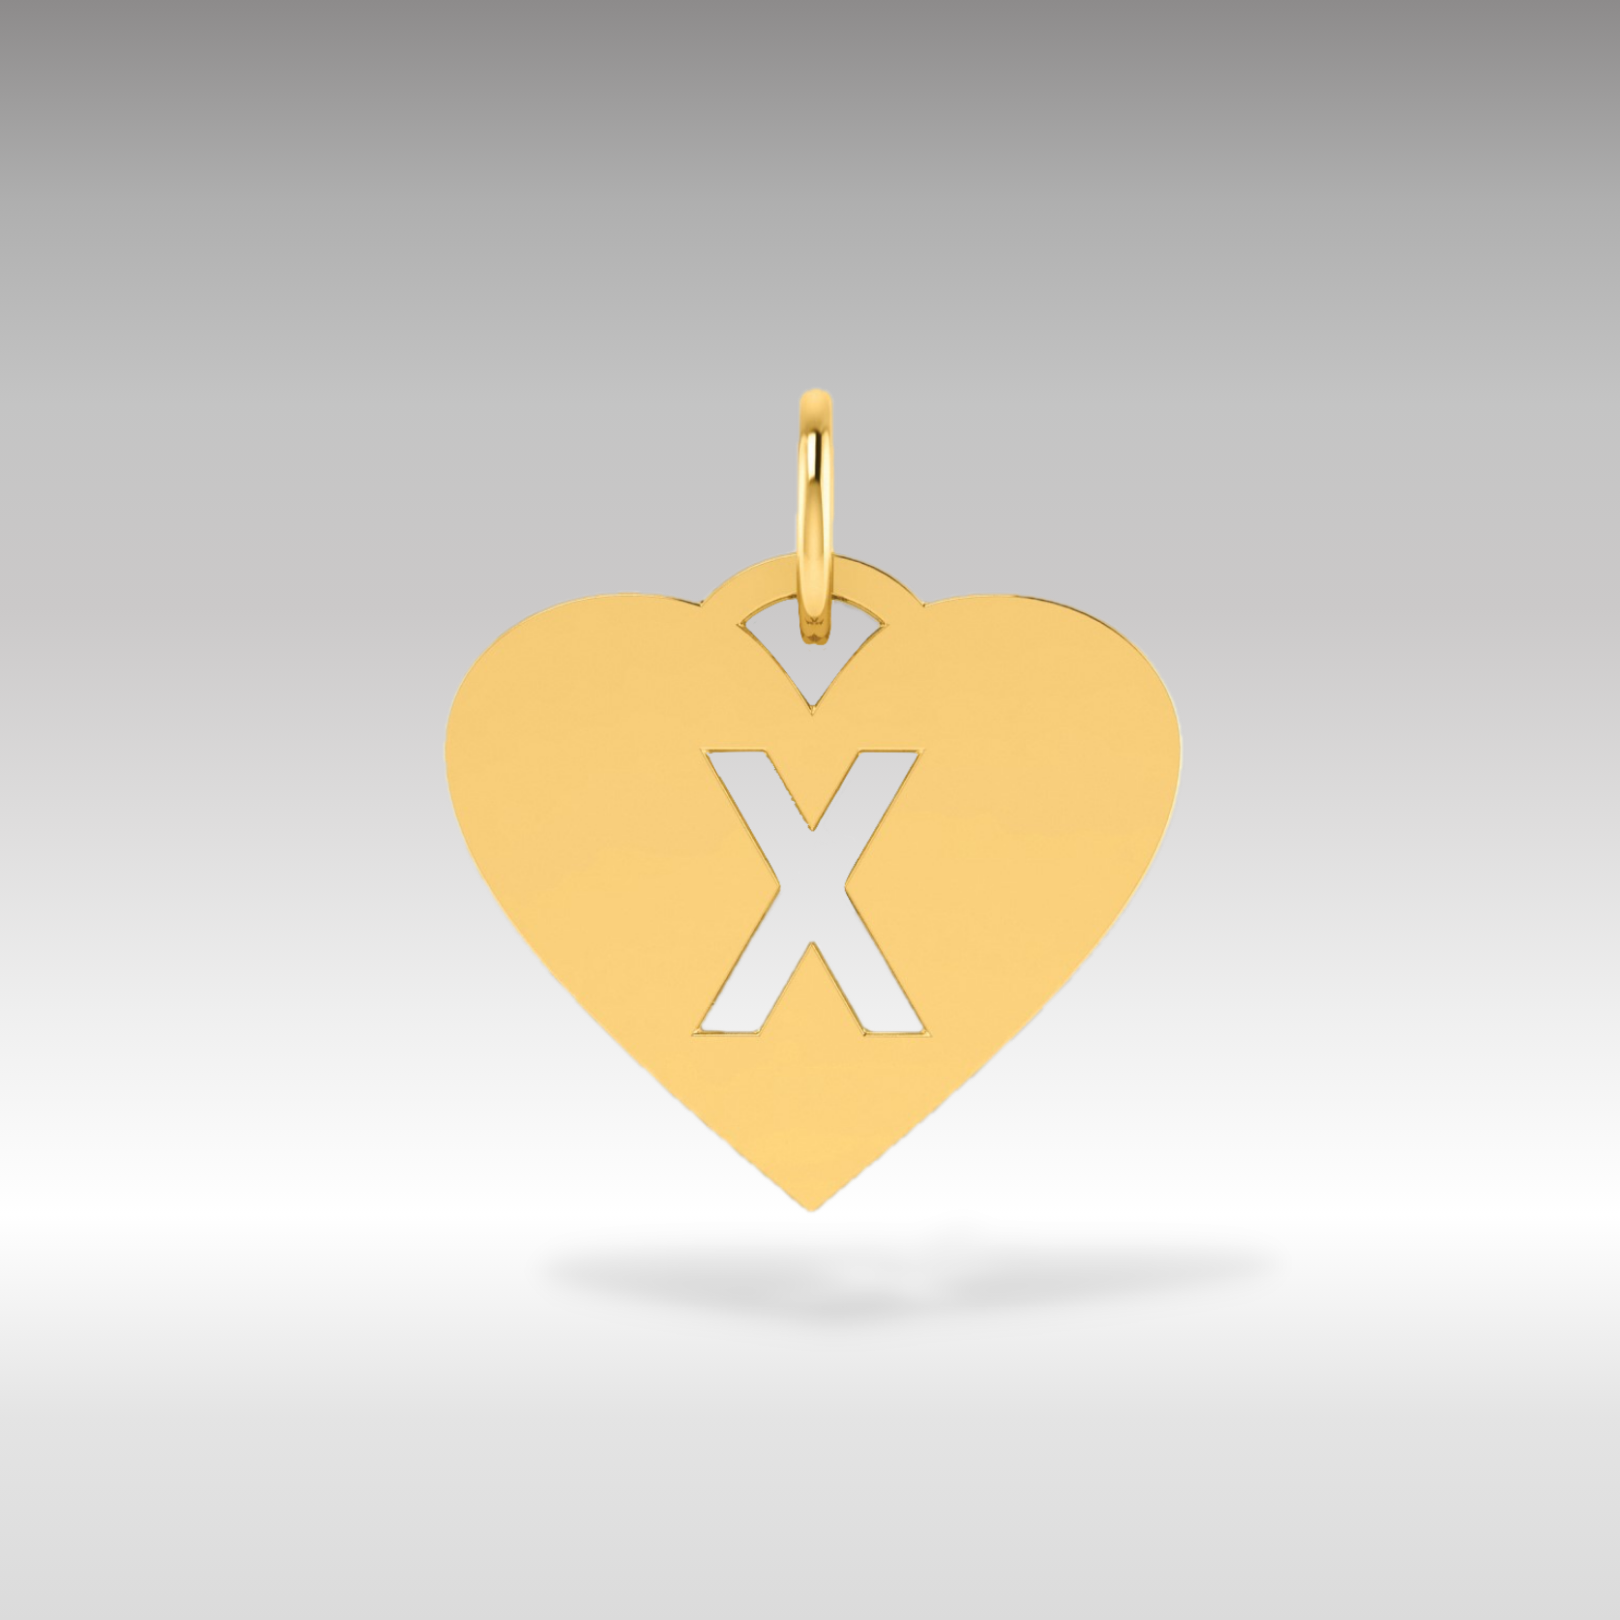 14K Gold Heart Pendant with Letter 'X' - Charlie & Co. Jewelry